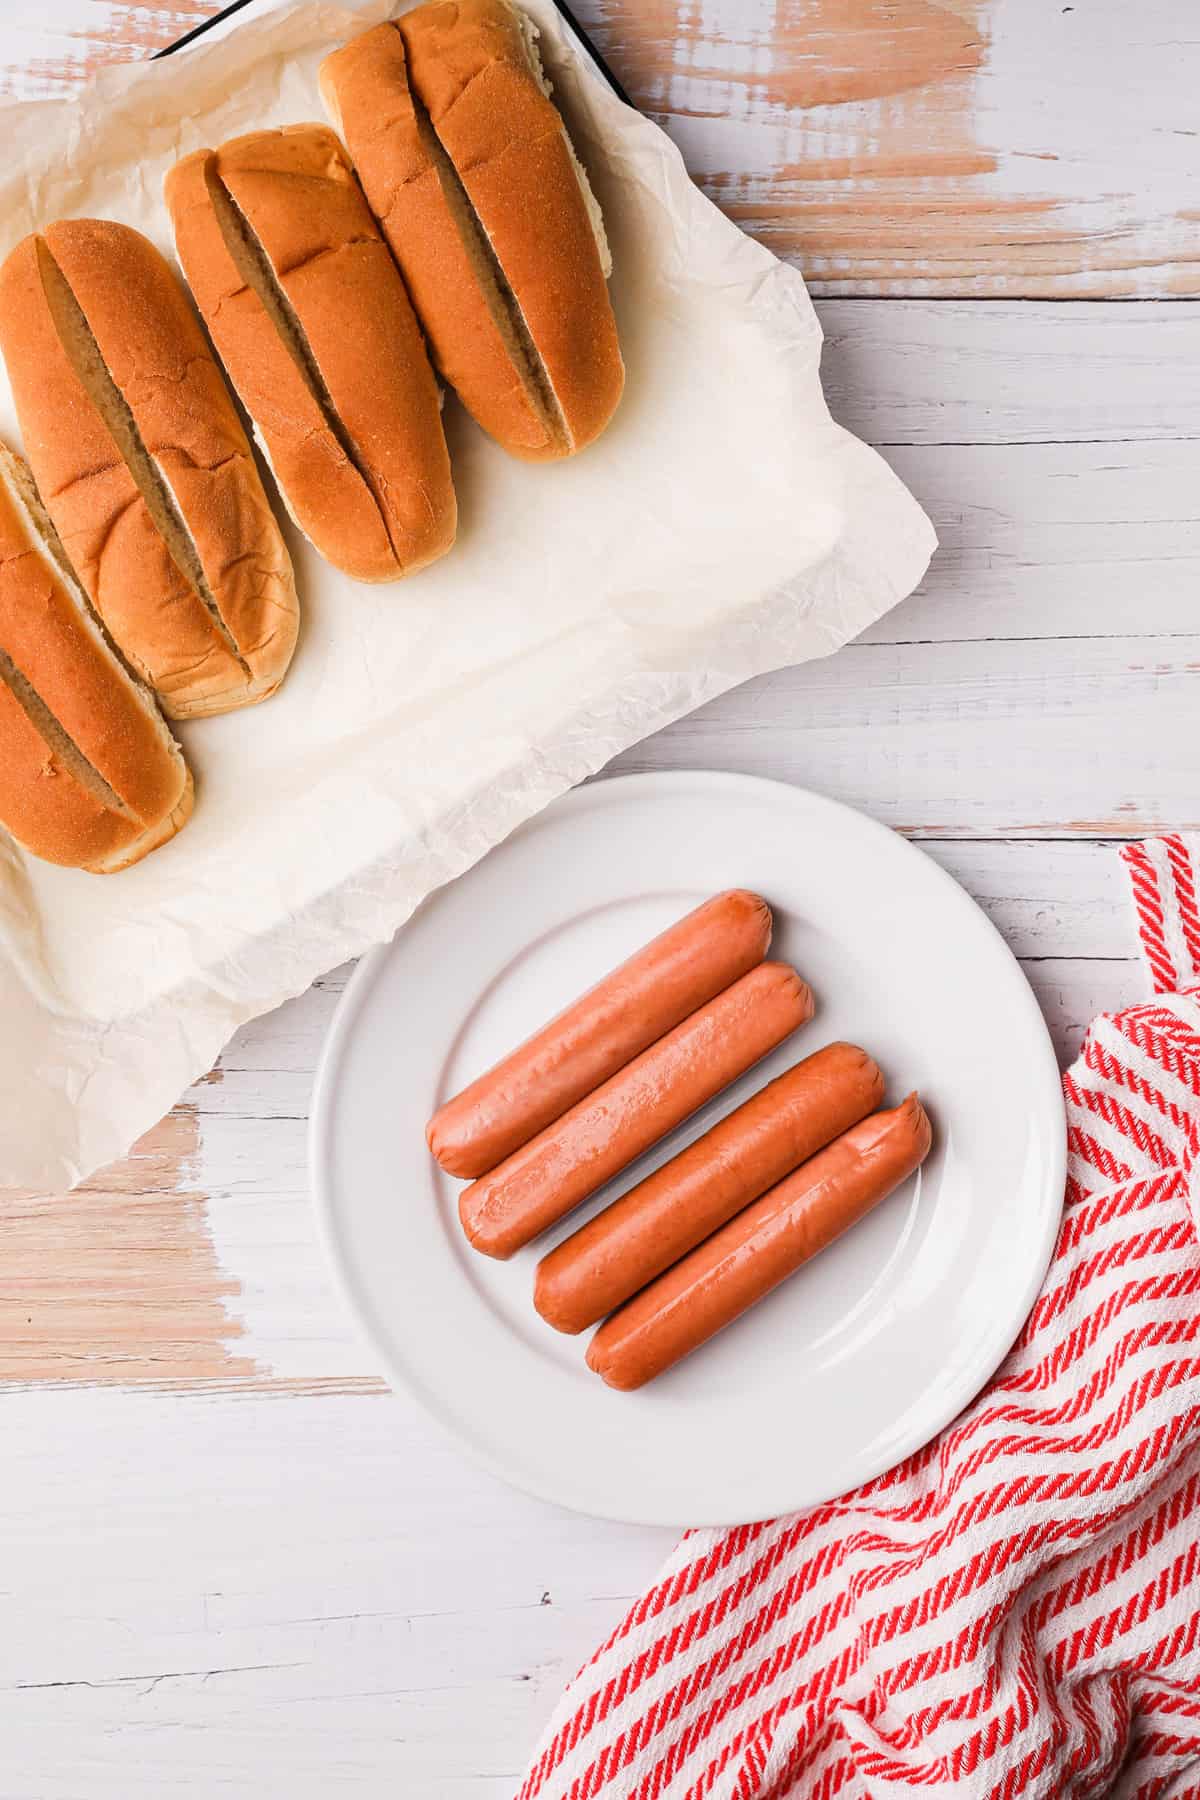 uncooked hot dogs and buns